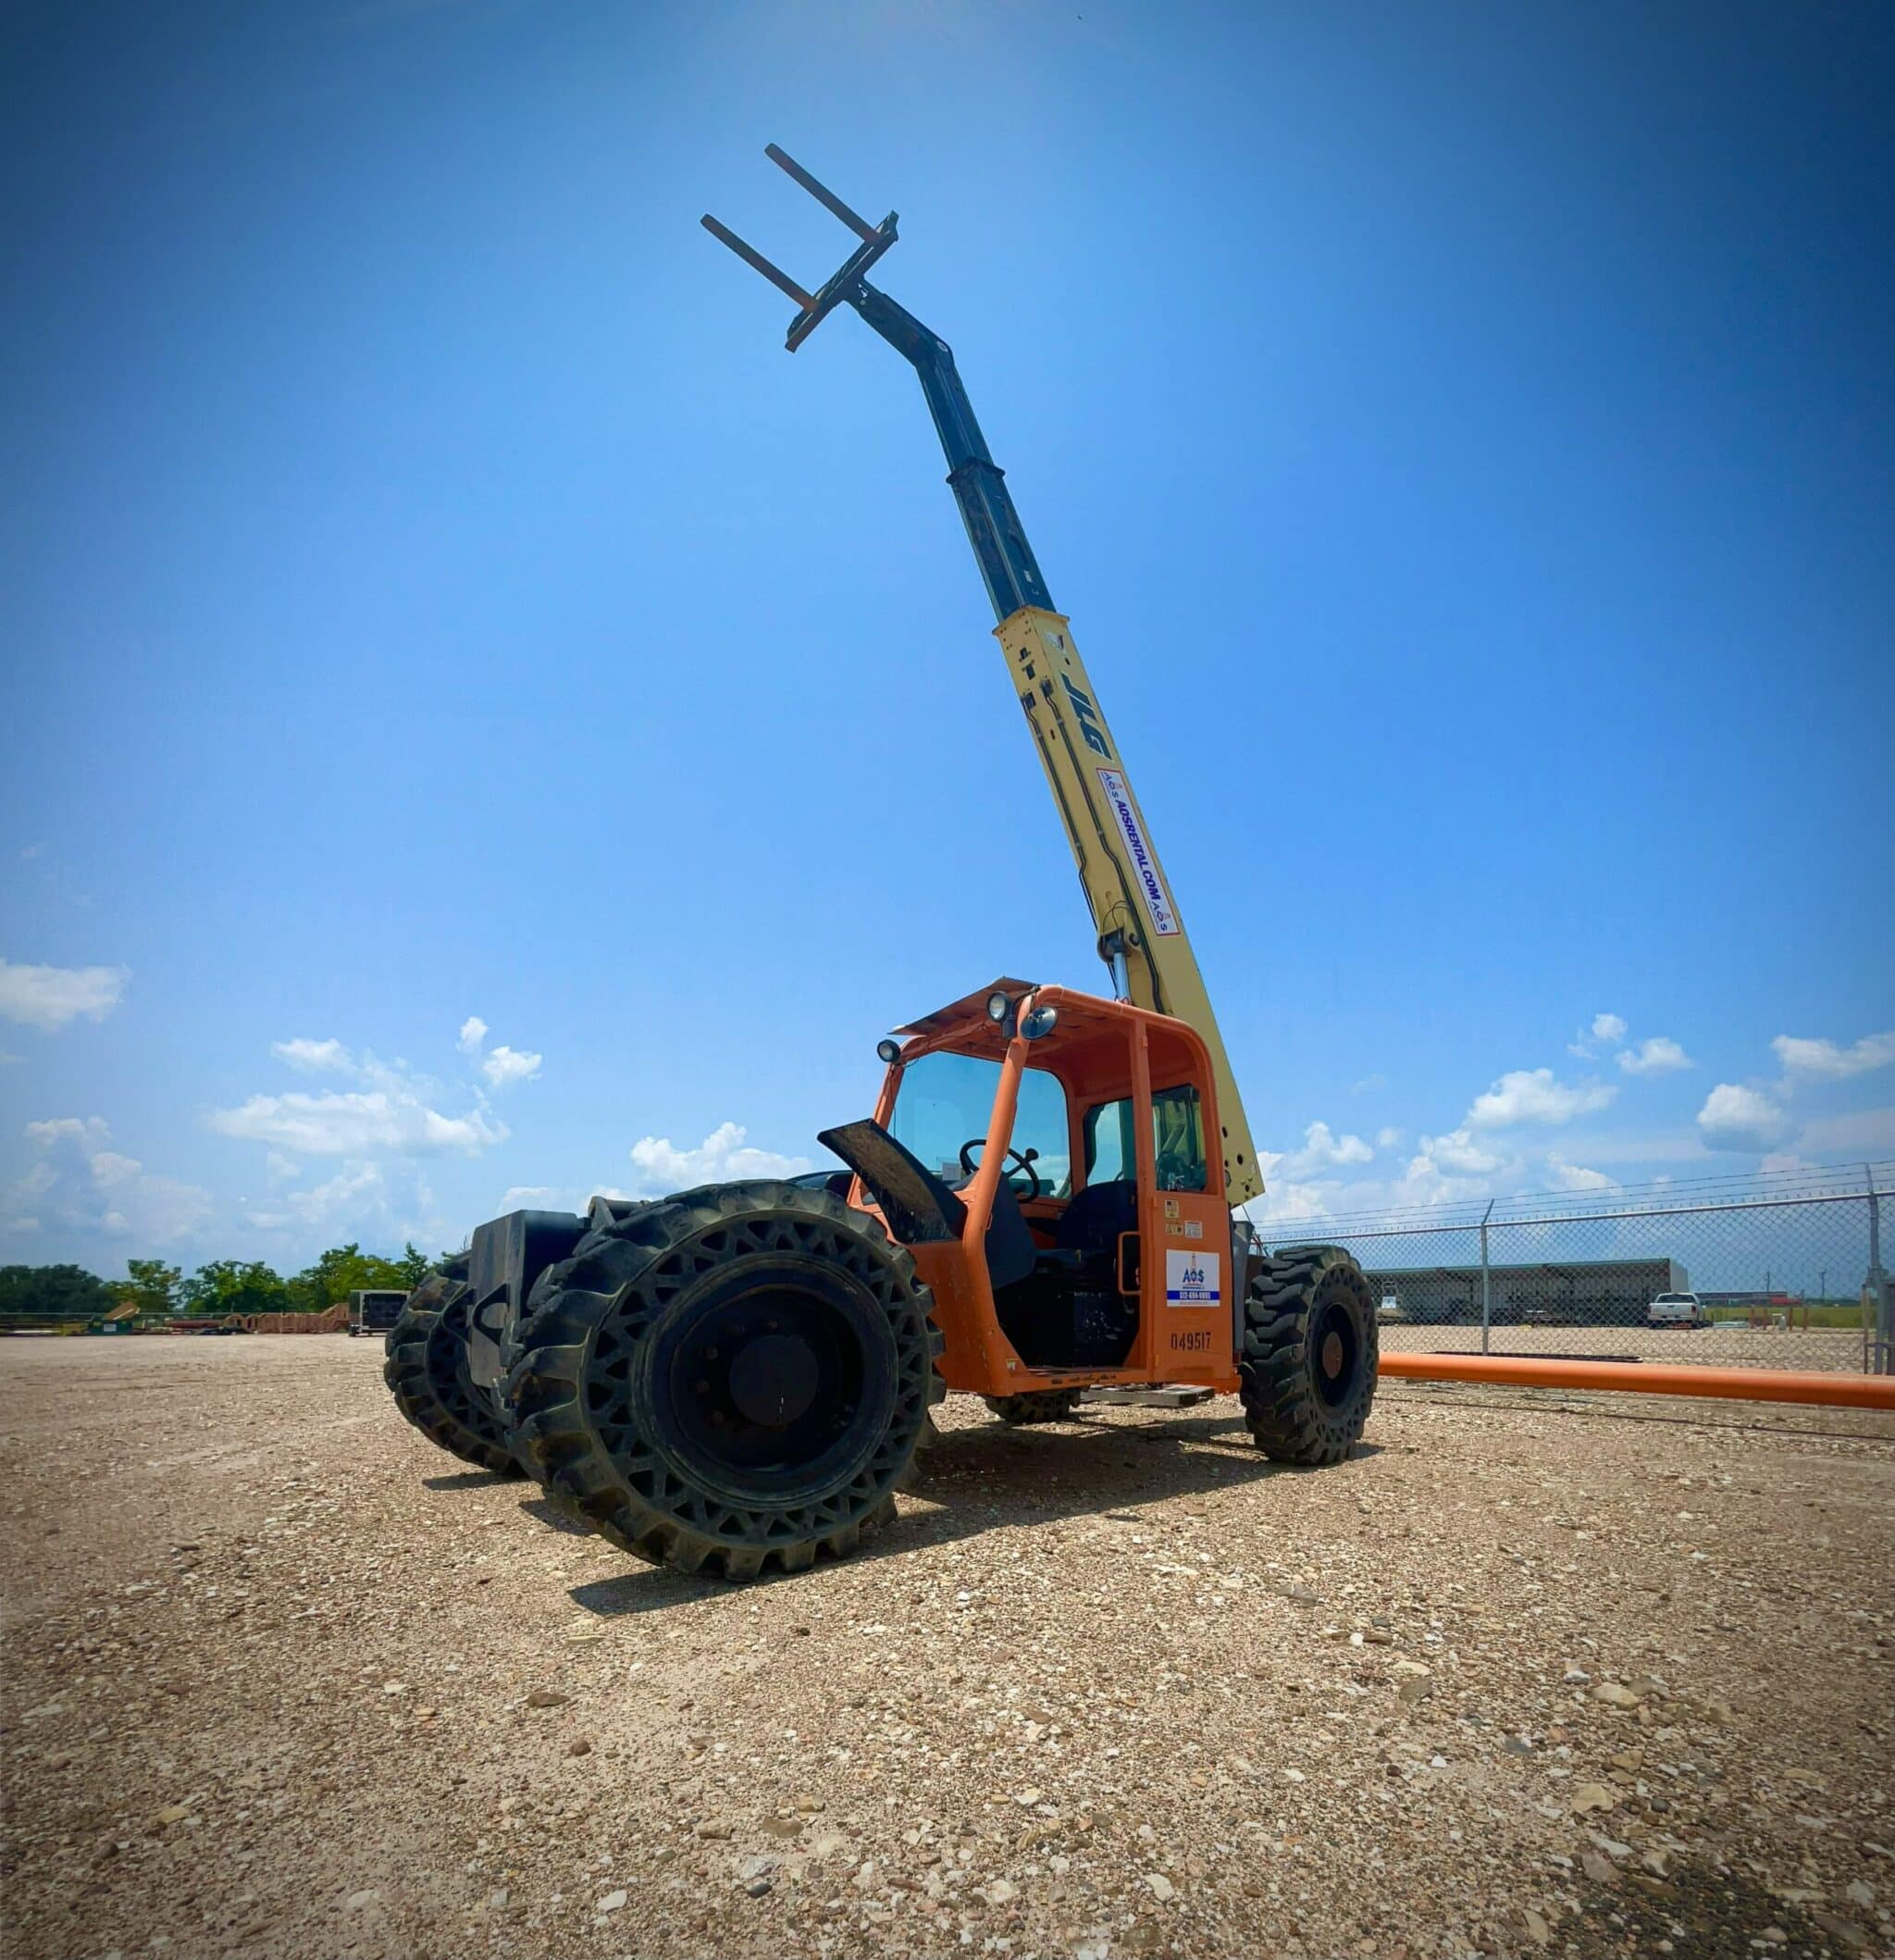 reach forklift fully extended in the air